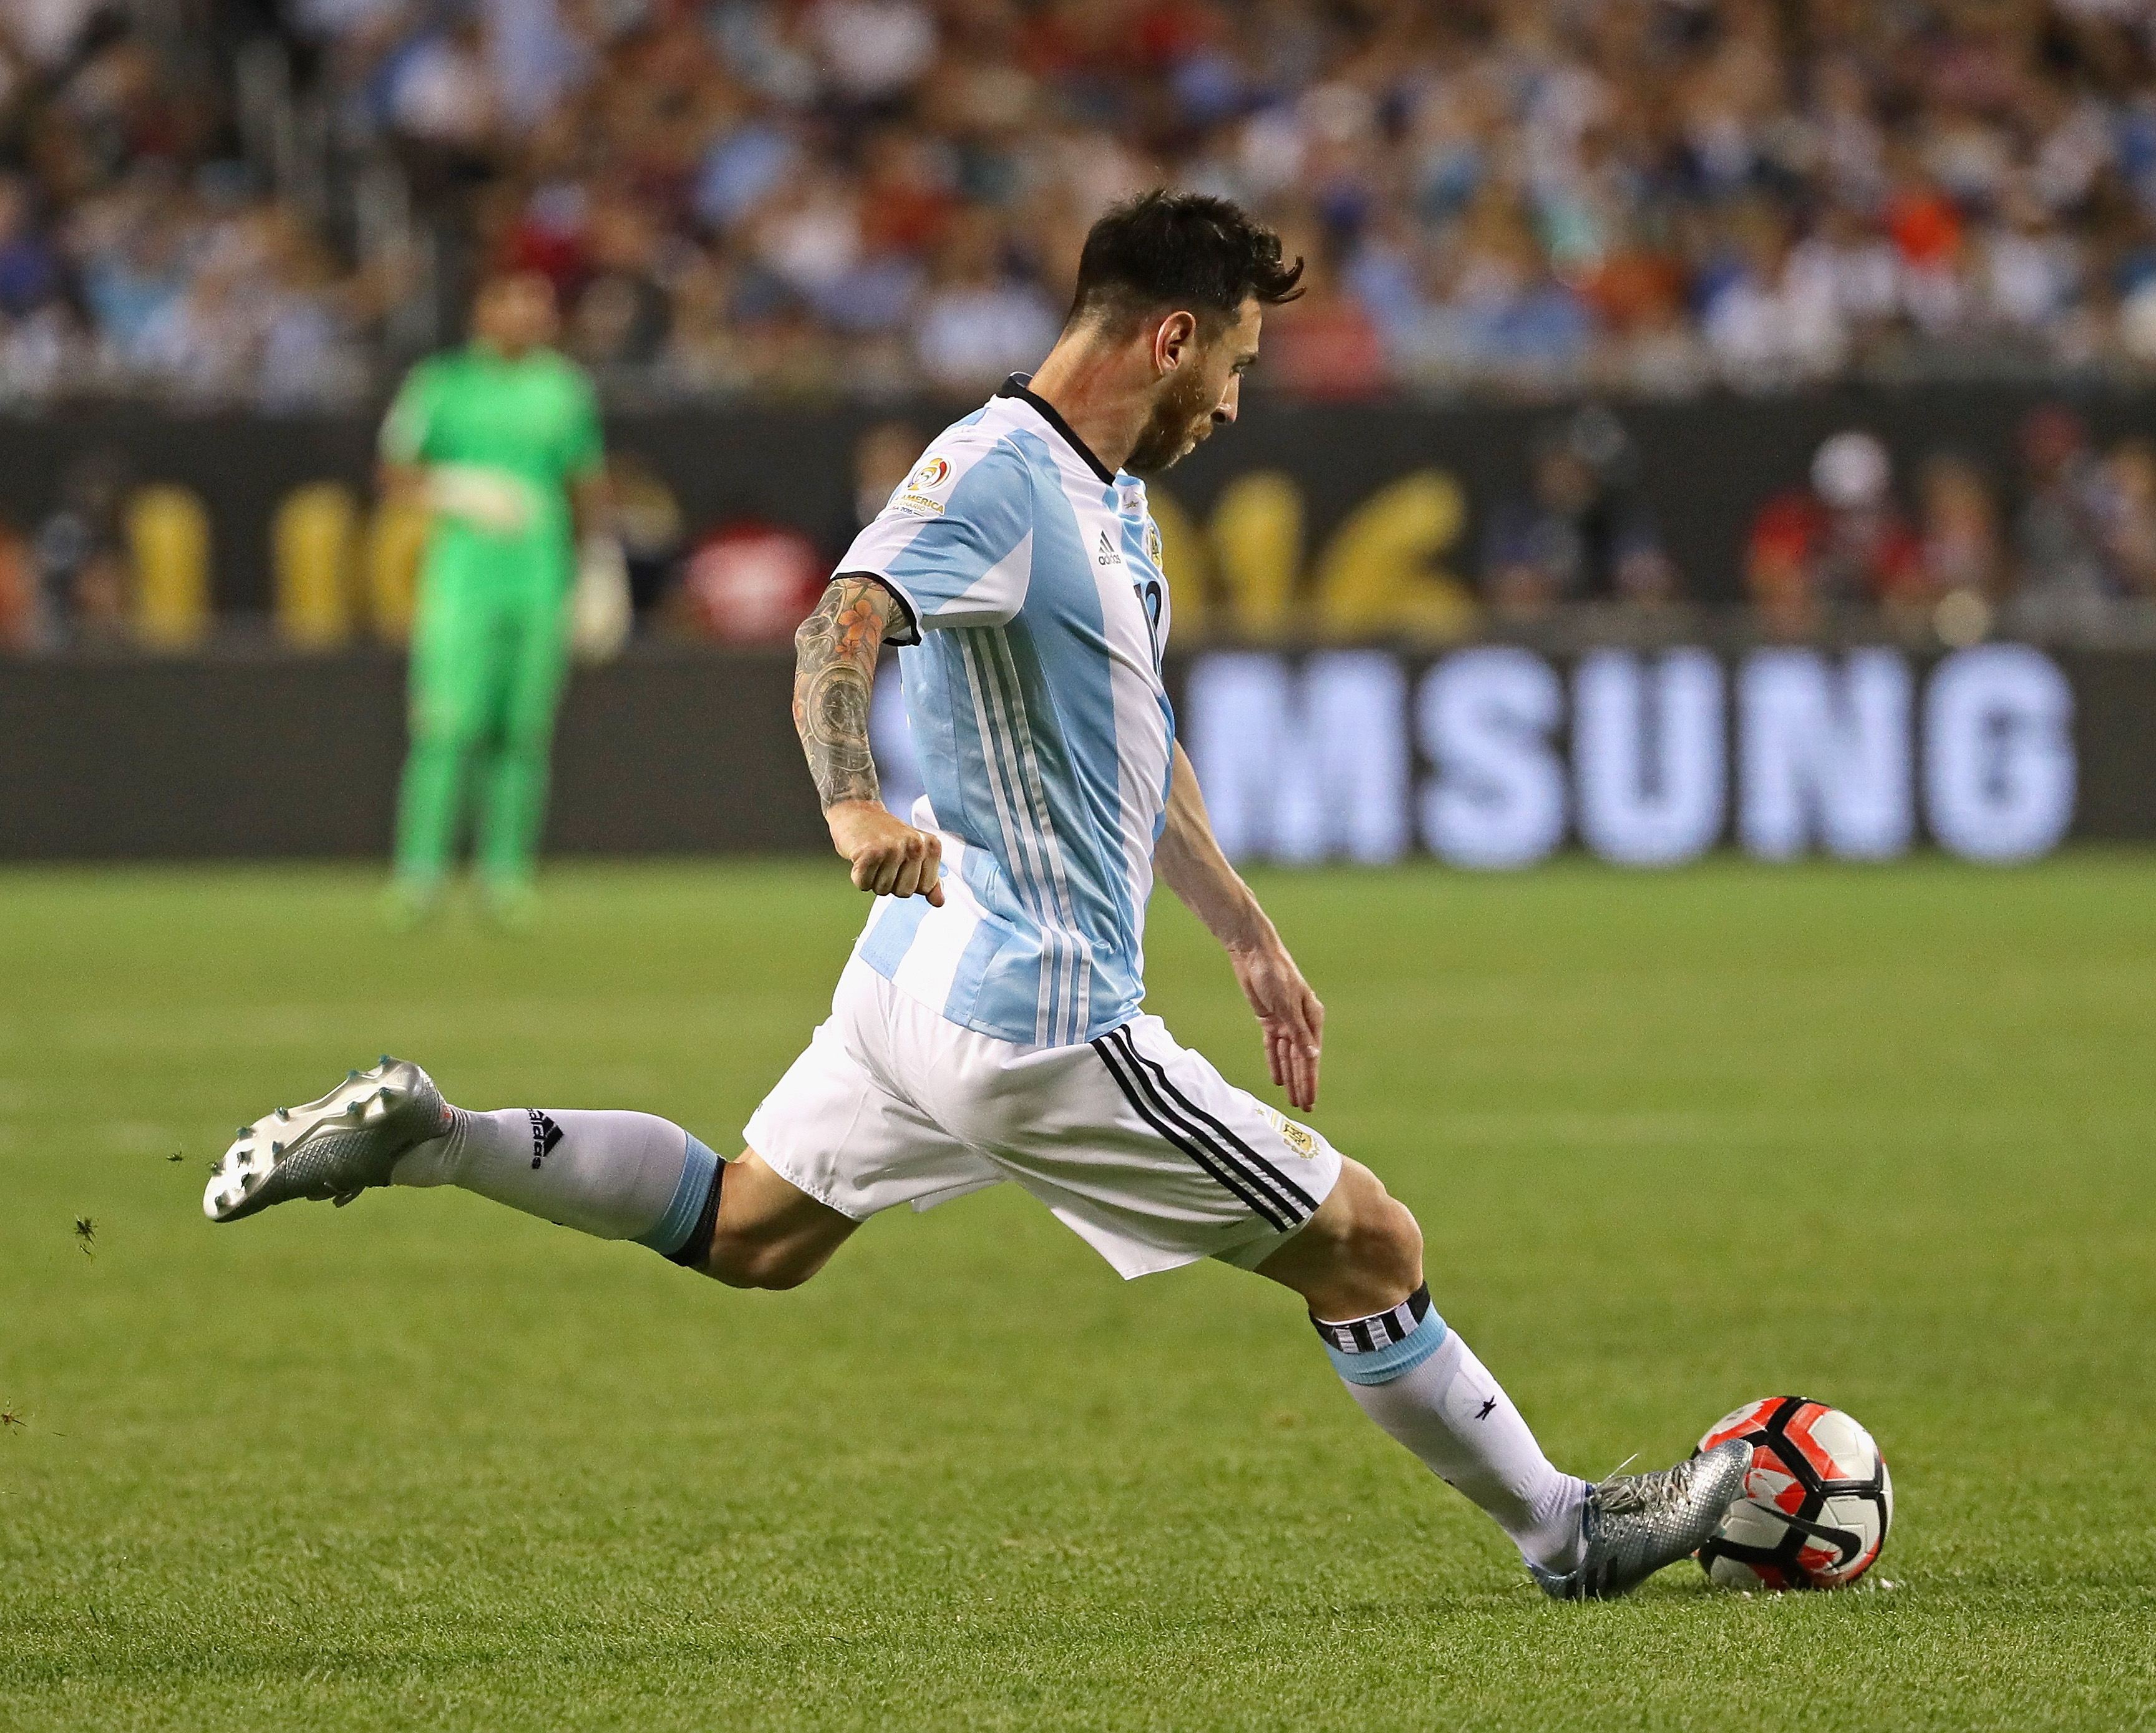 CHICAGO, IL - JUNE 10:  Lionel Messi #10 of Argentina scores a goal on a penalty kick against Panama during a match in the 2016 Copa America Centenario at Soldier Field on June 10, 2016 in Chicago, Illinois. Argentina defeated Panama 5-0.  (Photo by Jonathan Daniel/Getty Images)